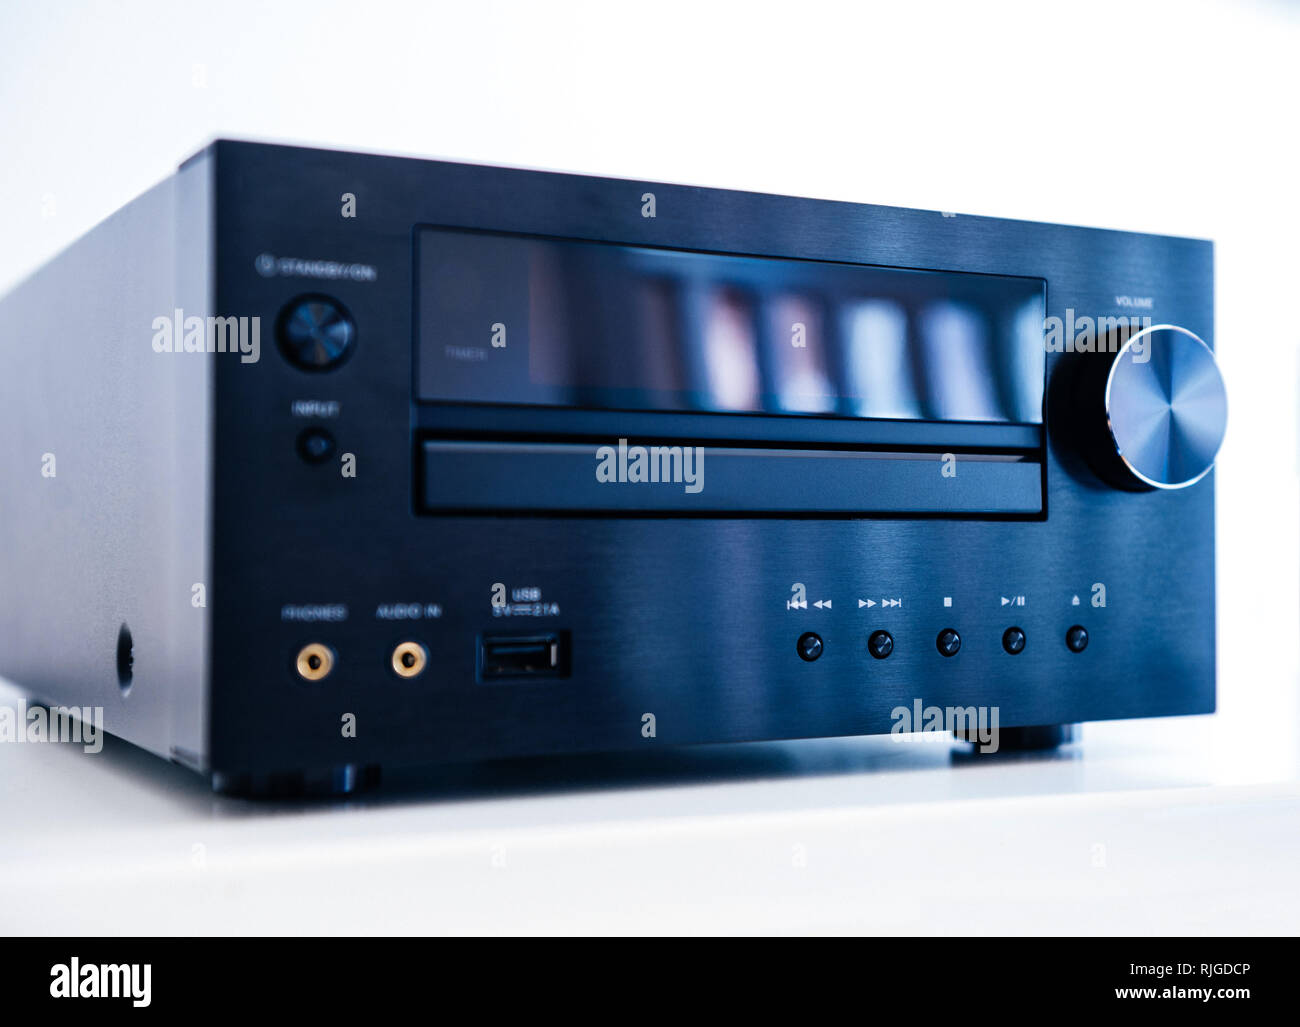 Radio Tuner Digital High Resolution Stock Photography and Images - Alamy